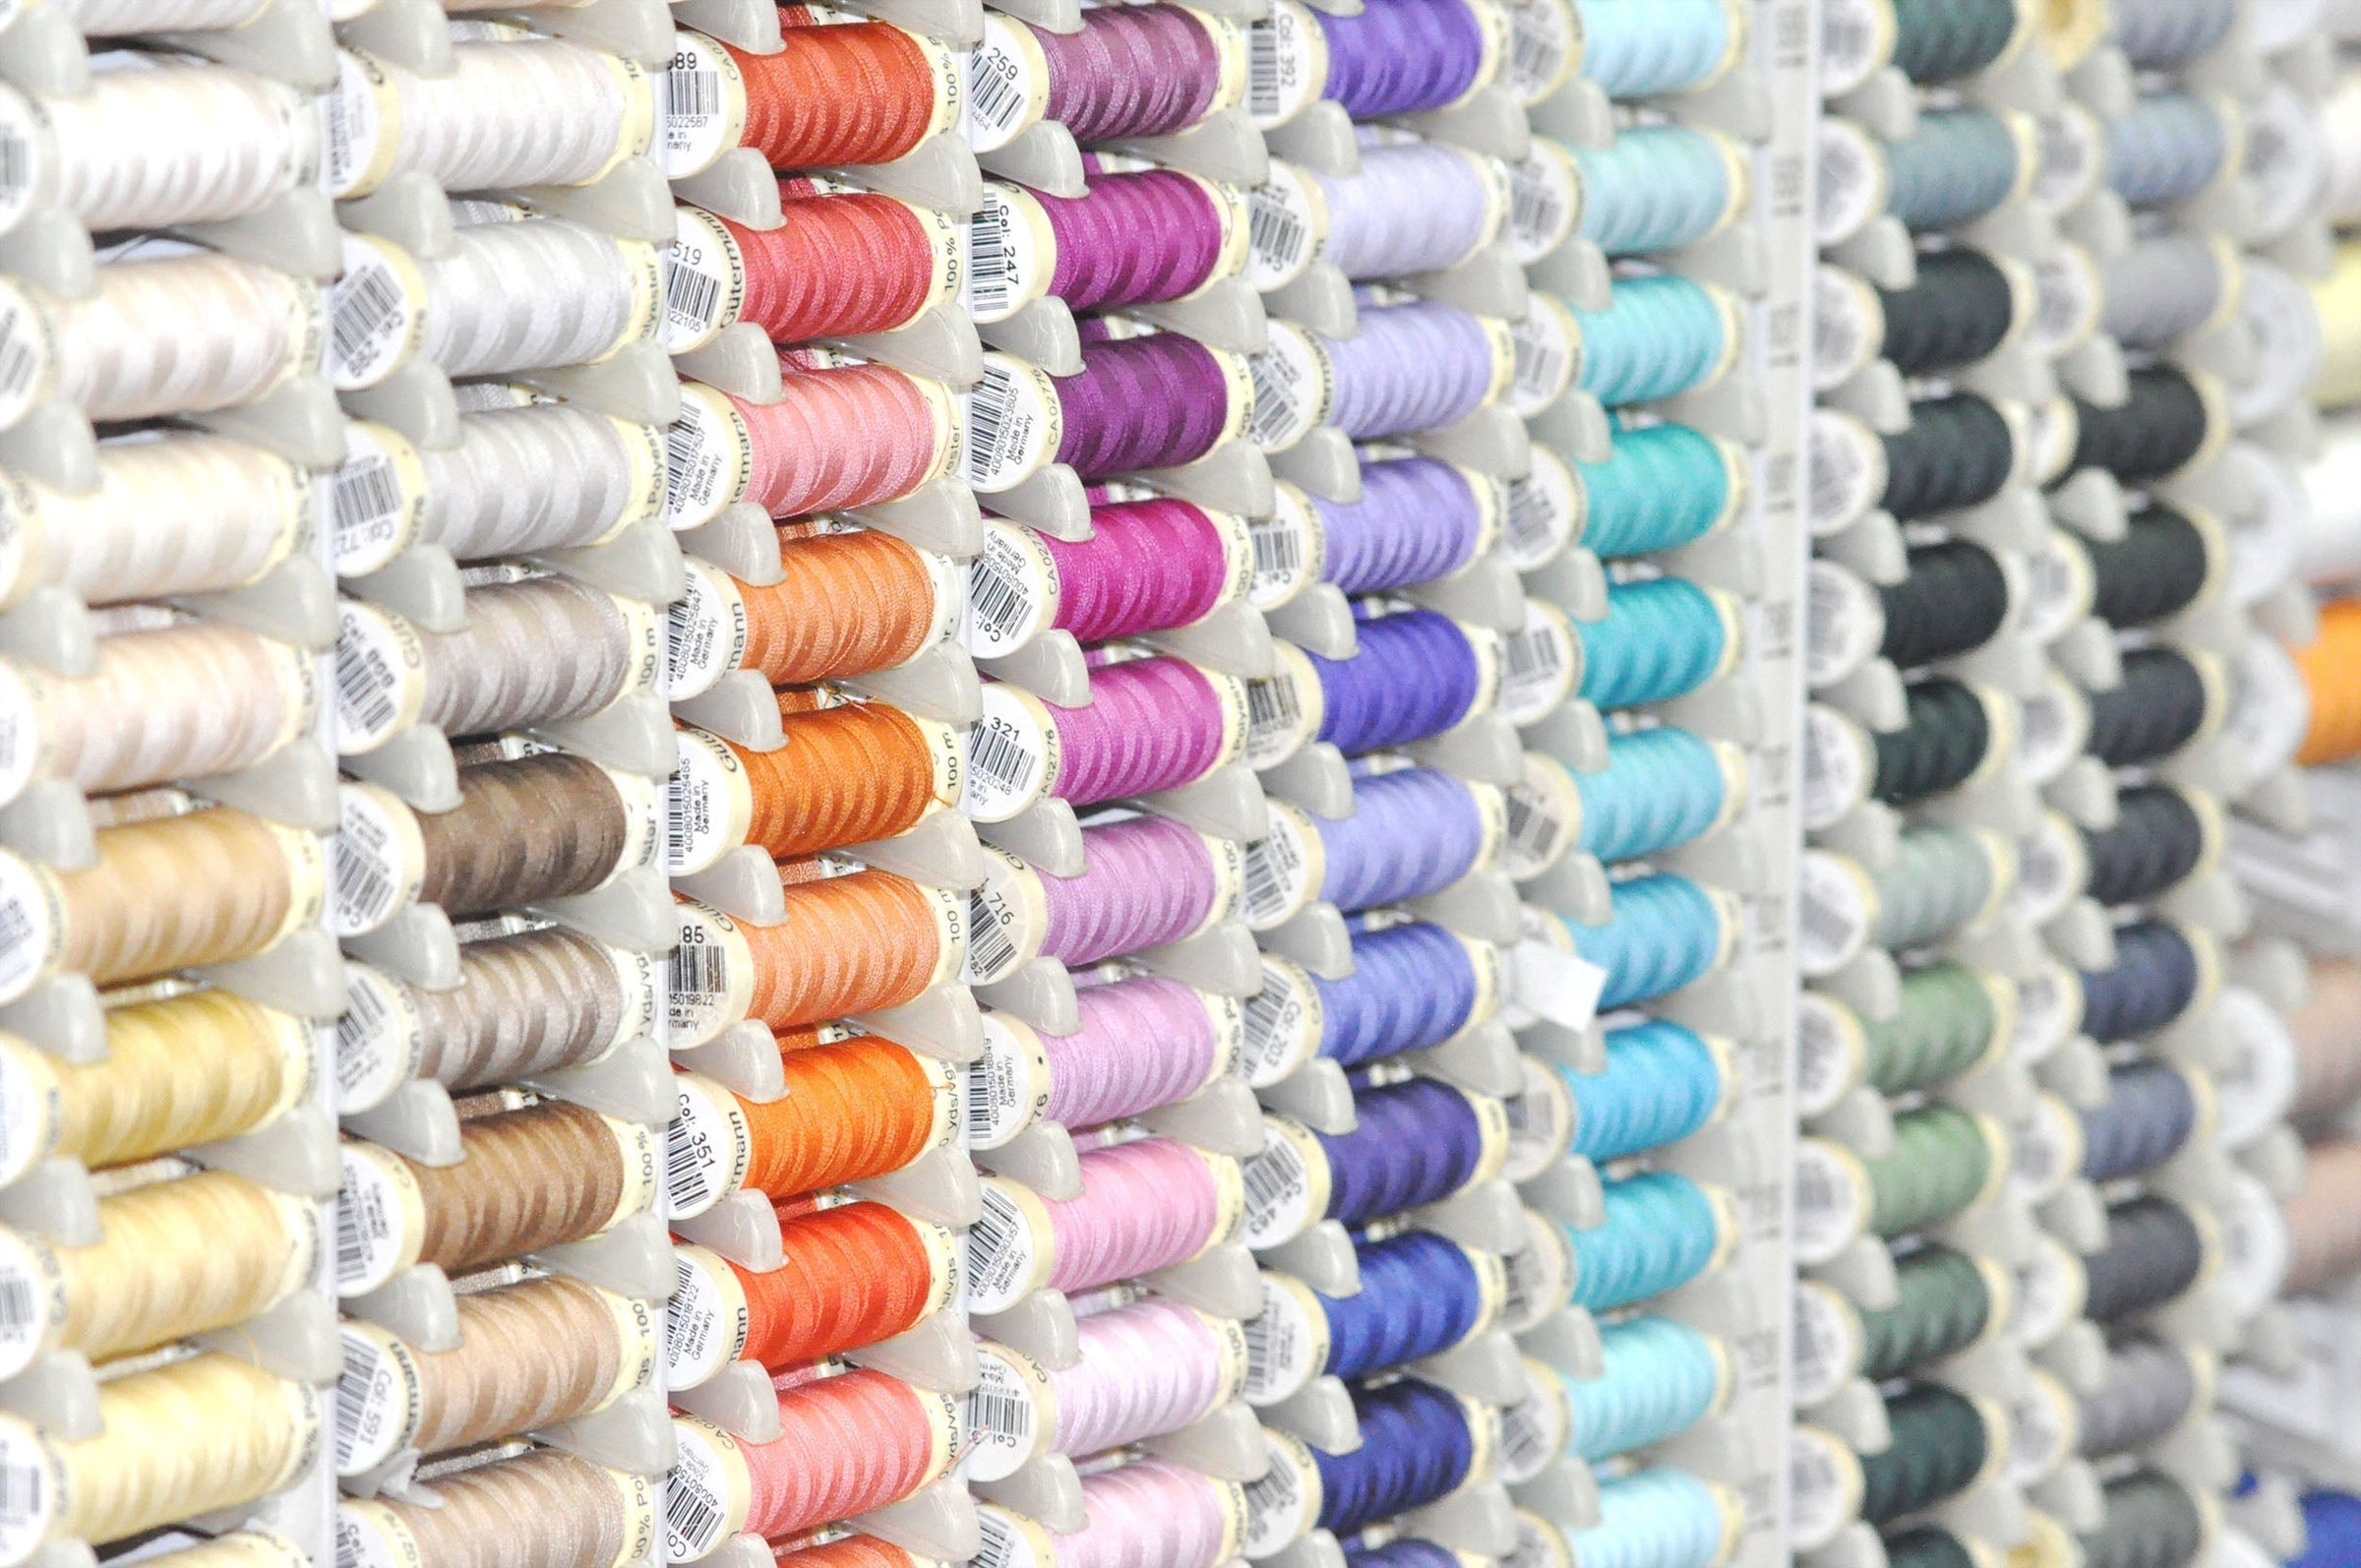 gutermann thread 250 metres sewing thread - Fabric Collection